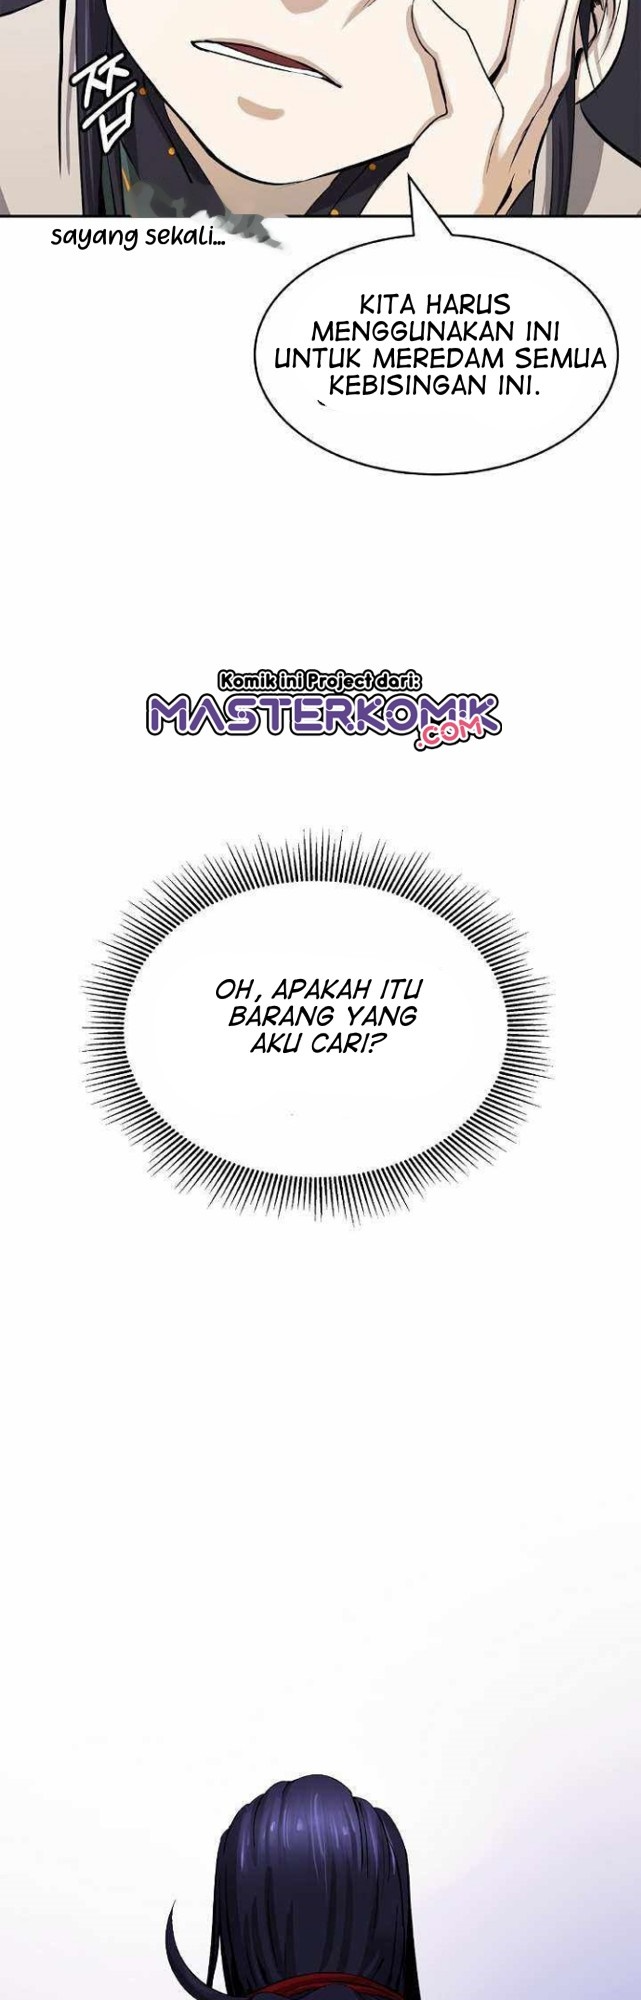 Cystic Story (Call The Spear) Chapter 55